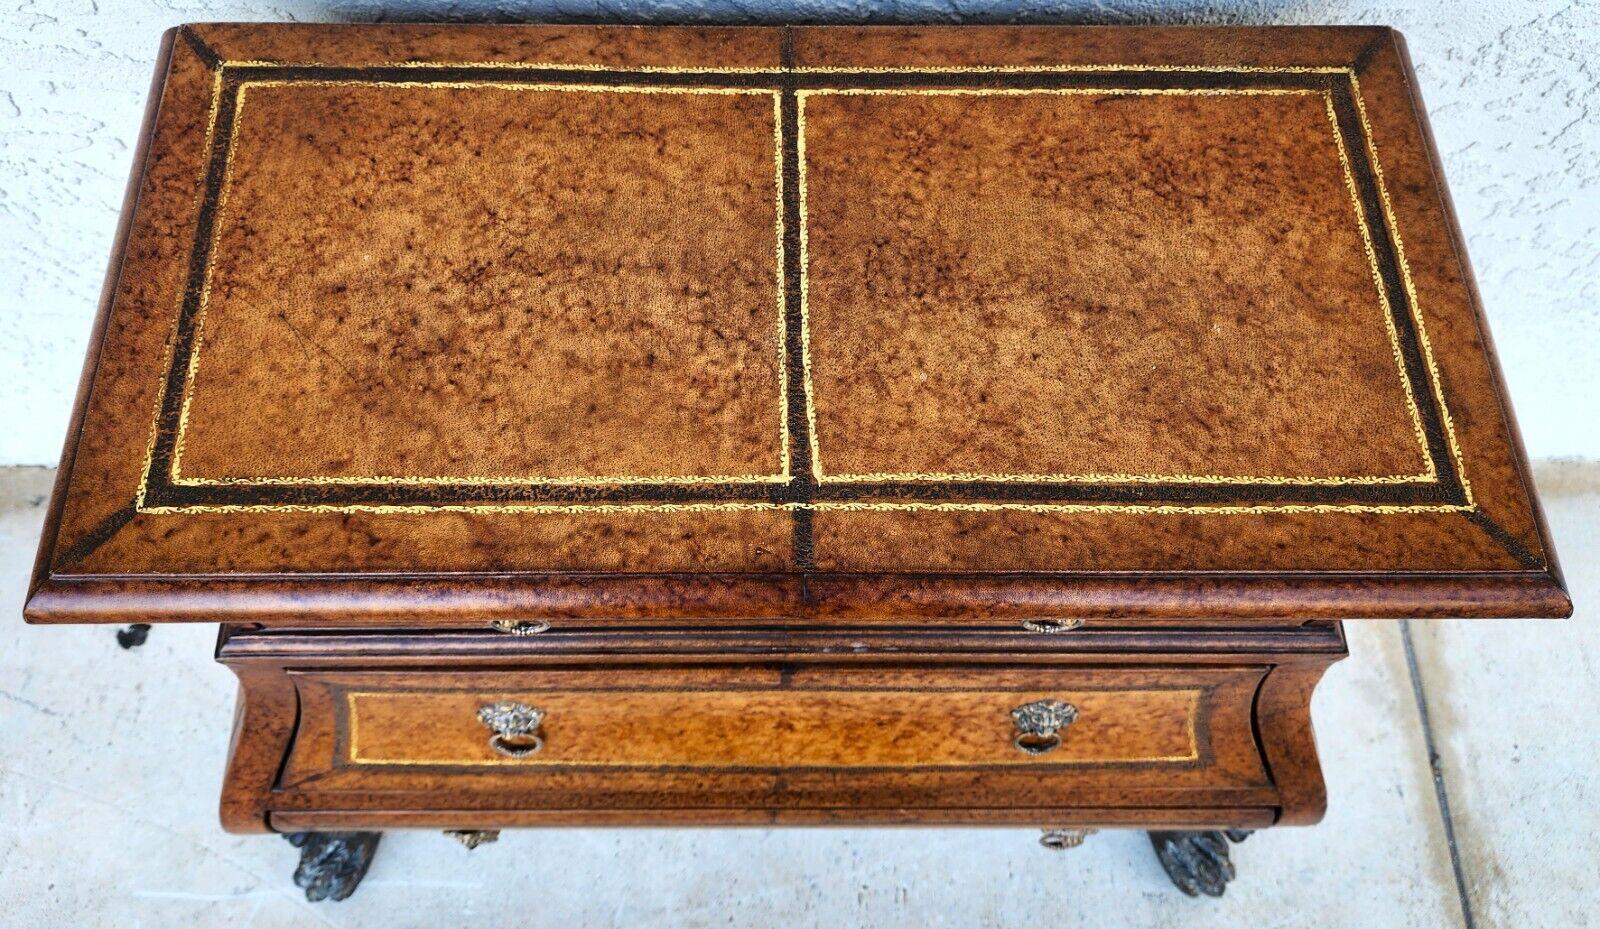 For FULL item description click on CONTINUE READING at the bottom of this page.

Offering One Of Our Recent Palm Beach Estate Fine Furniture Acquisitions Of An 
Italian Leather Wrapped Nightstand Bedside Table Bombay Chest Commode
With solid brass